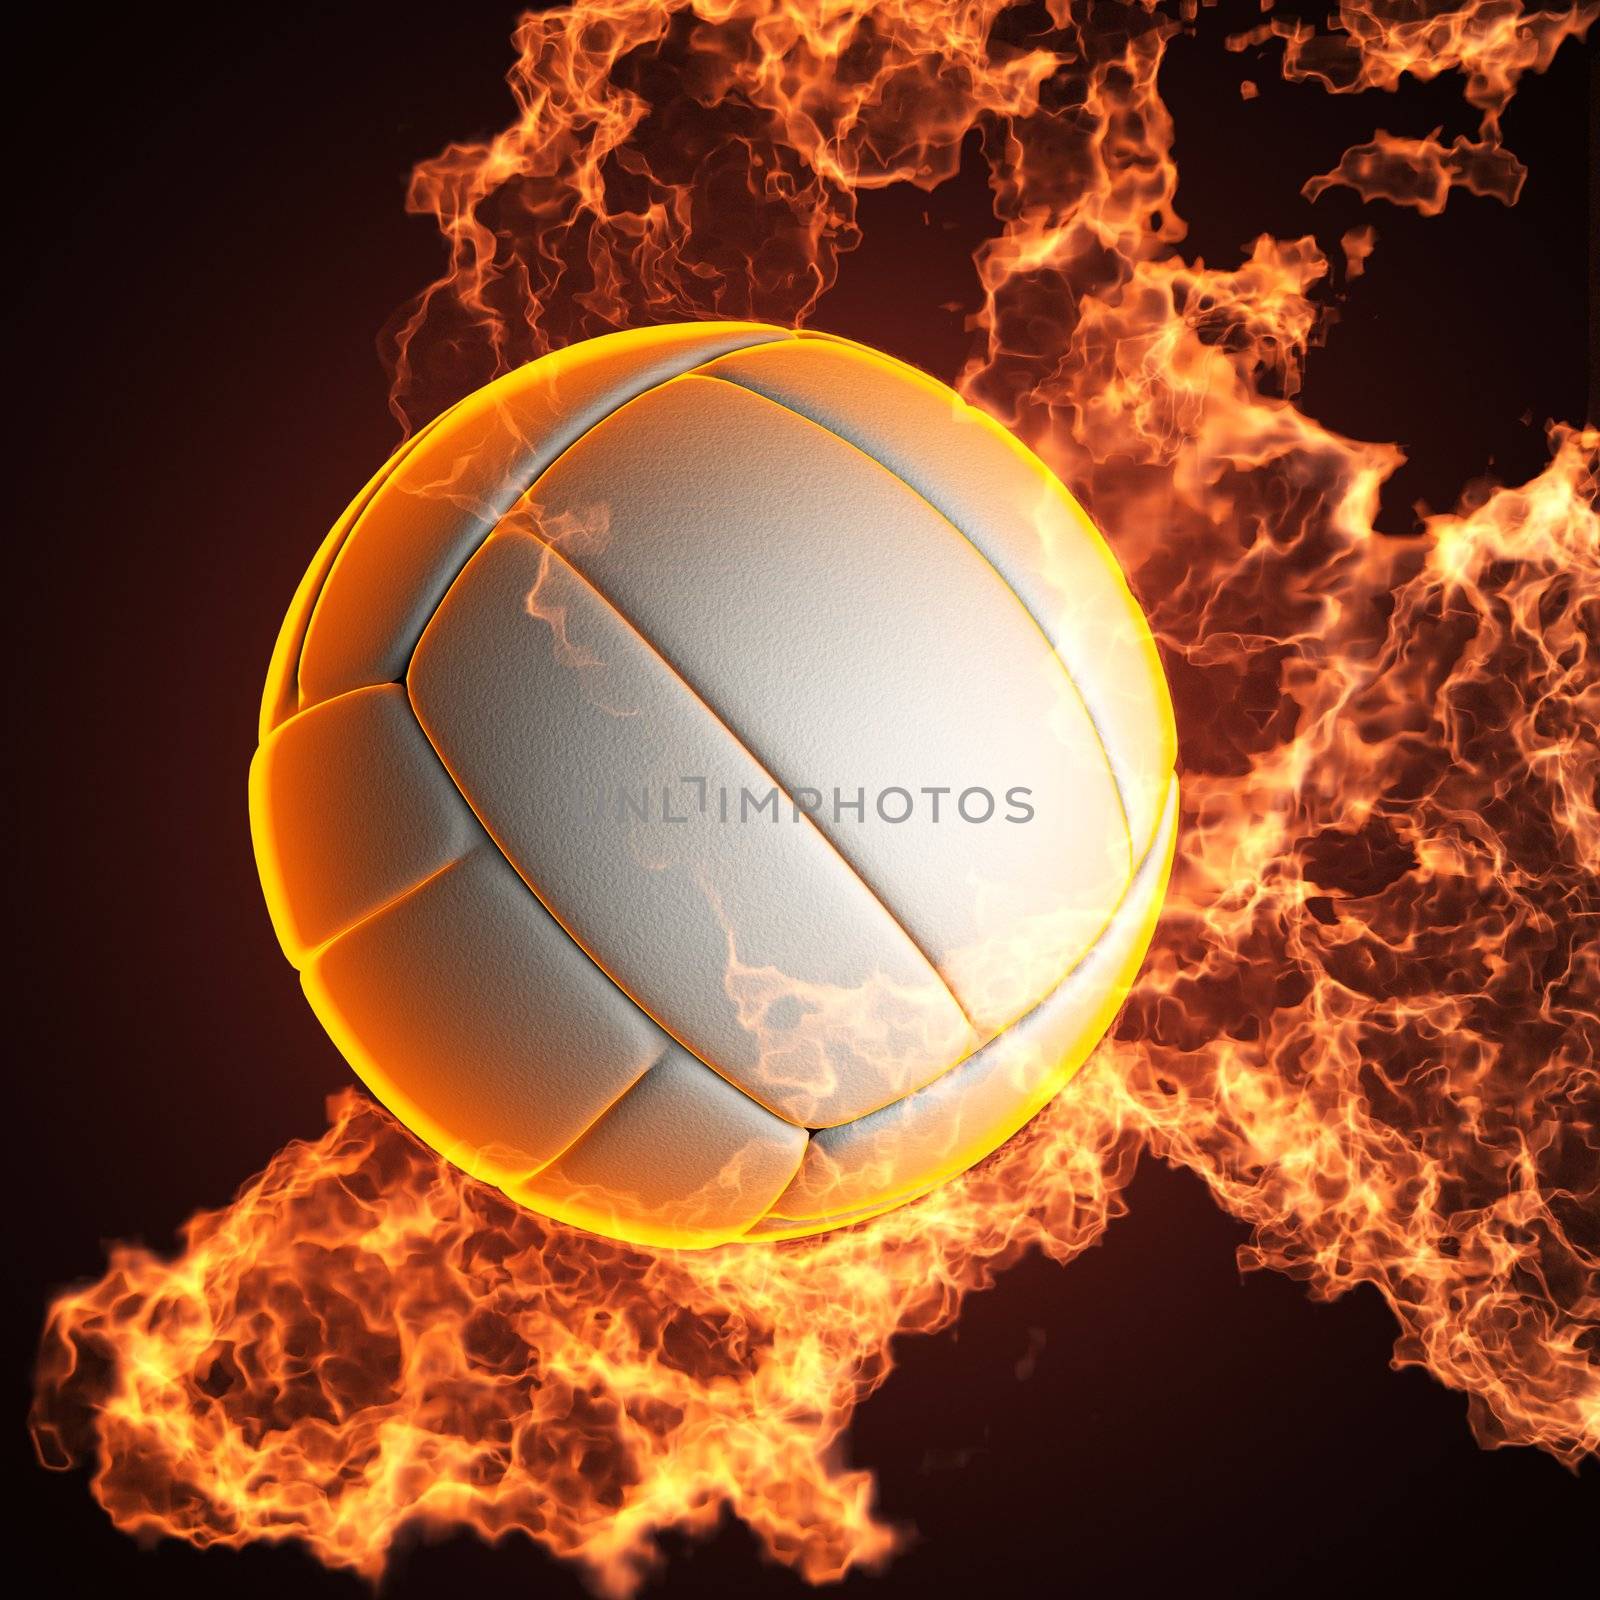 Volleyball ball in fire by videodoctor